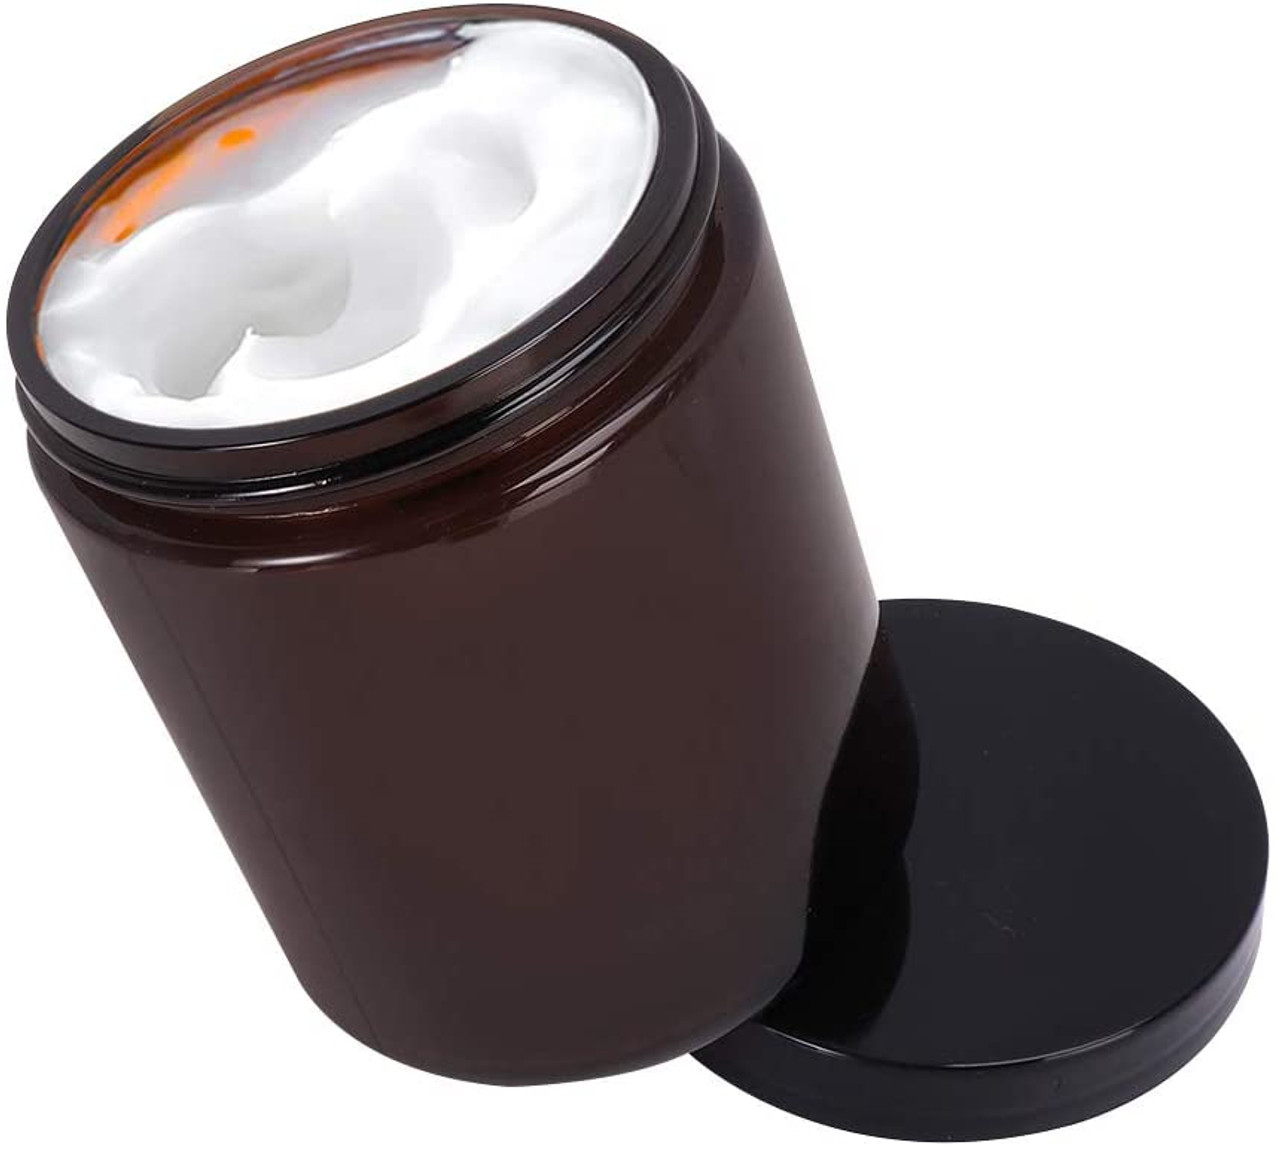 4oz Amber Glass Jar With Insulated Black Plastic Lid for Creams, Spice,  Honey, Skincare and Essential Oils. Also, Great for Candle Making 